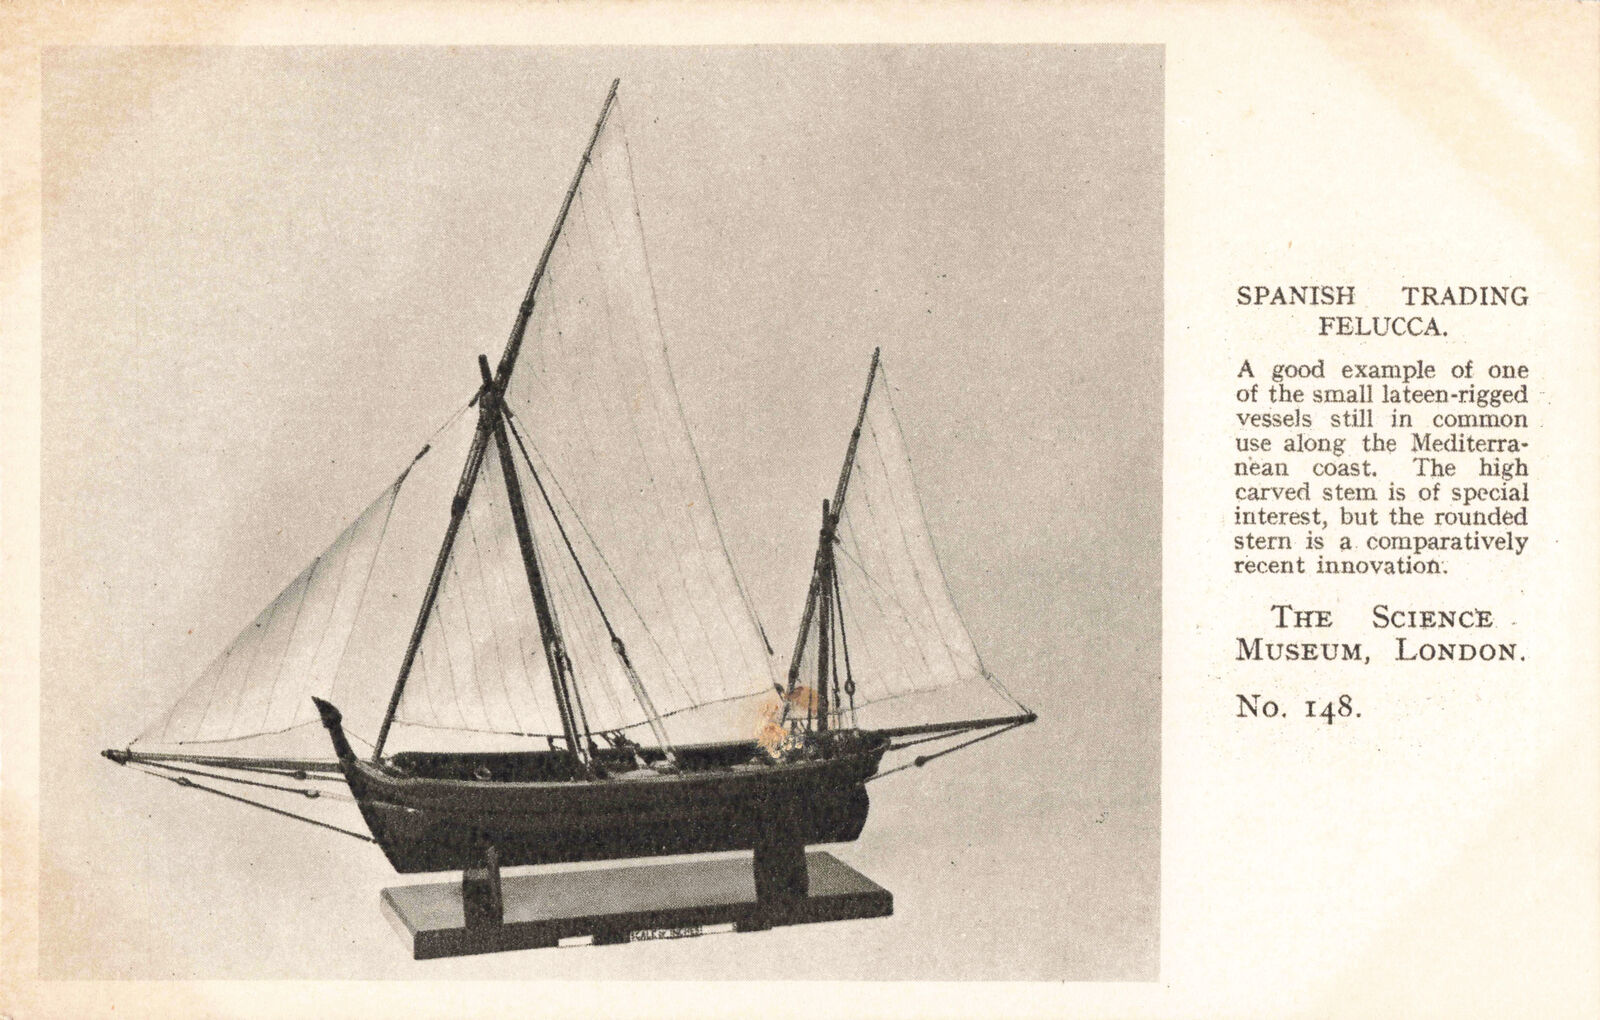 R201892 Spanish Trading Felucca. The Science Museum. London. No. 148. Waterlow